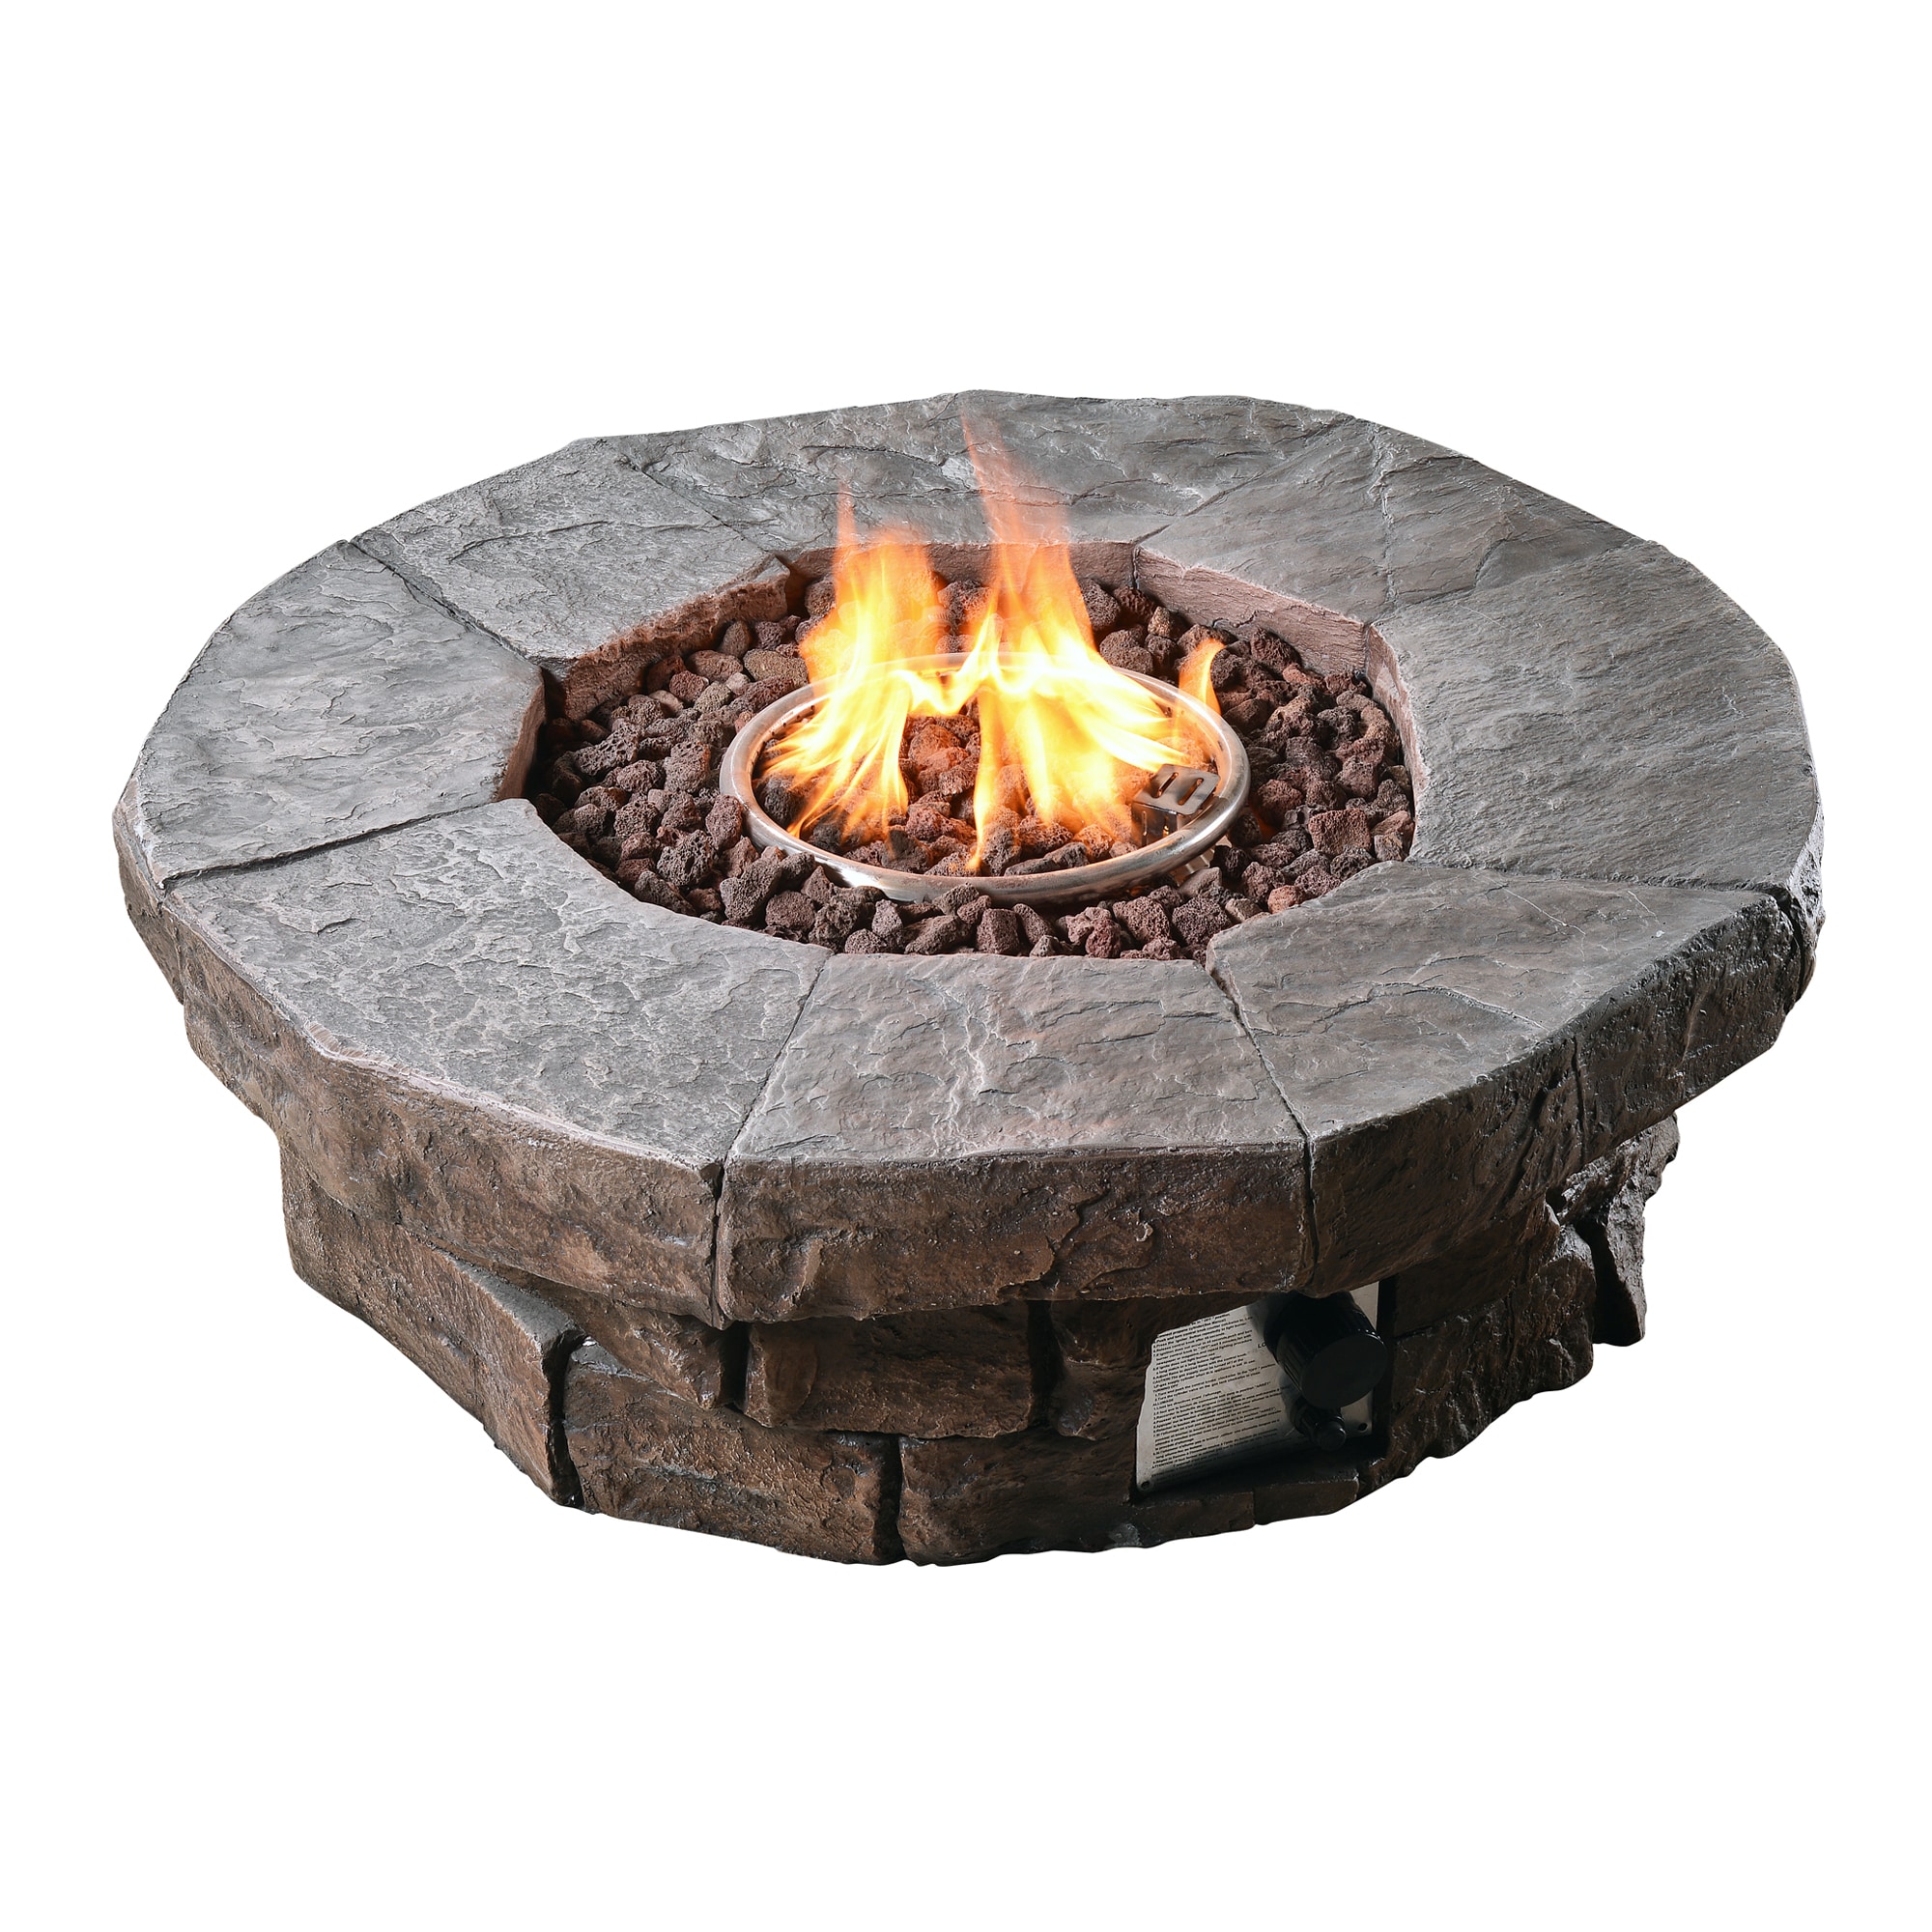 Teamson Propane Fire Pits 37 01 In W, Fire Pit Btu Recommendation